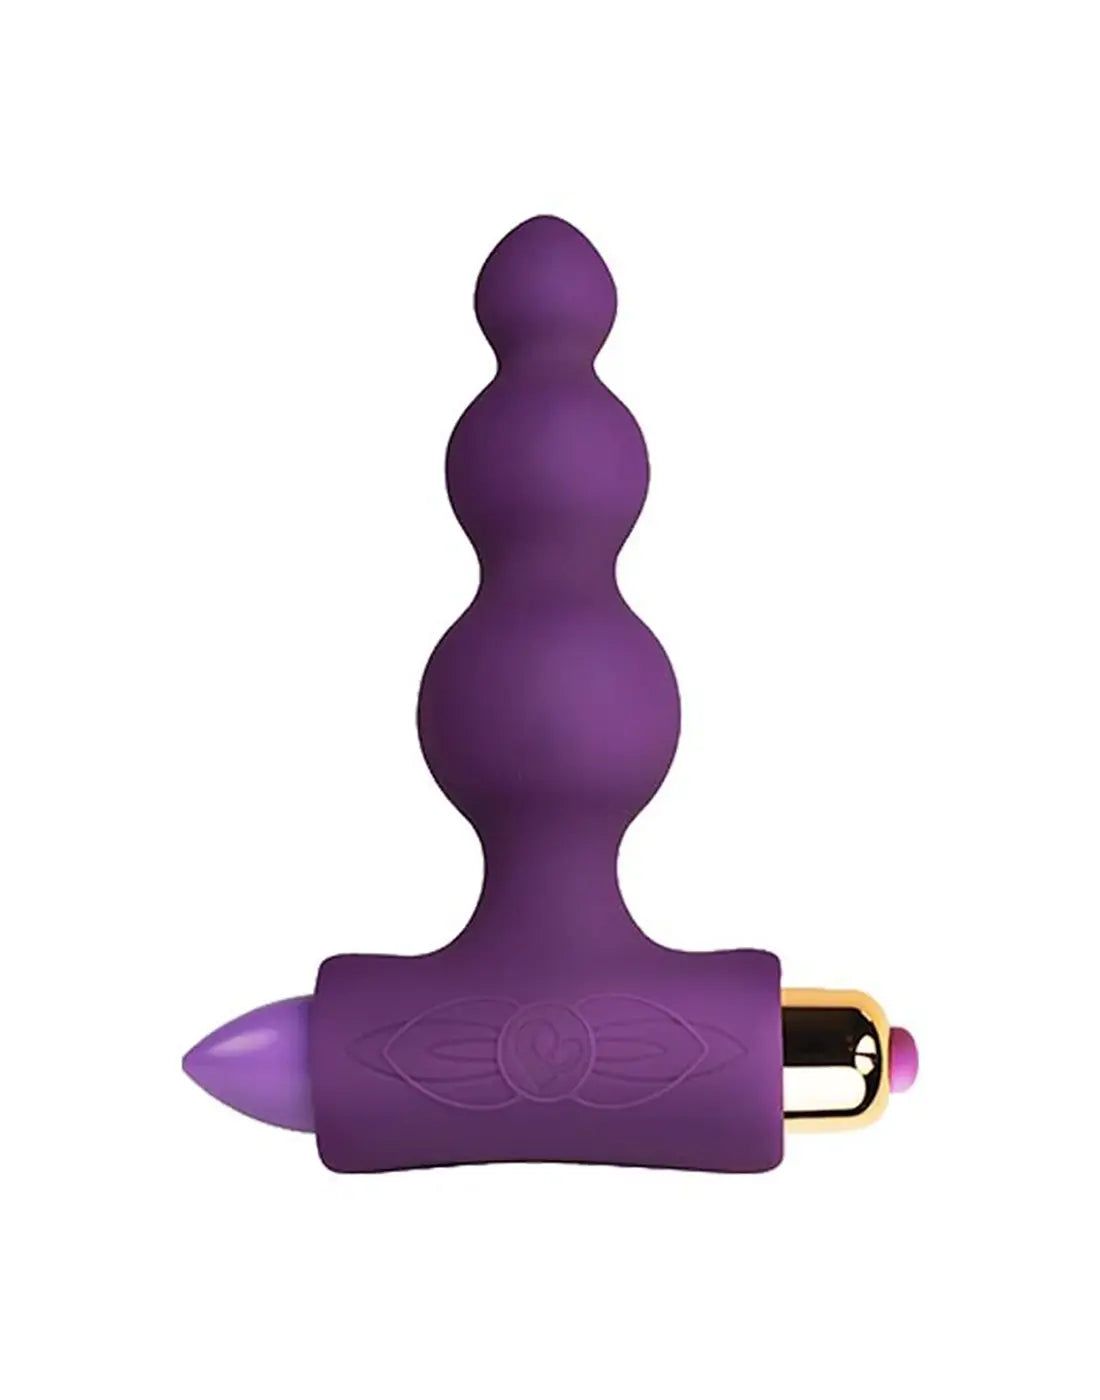 Shop Our Vibrating Anal Sex Toys Online